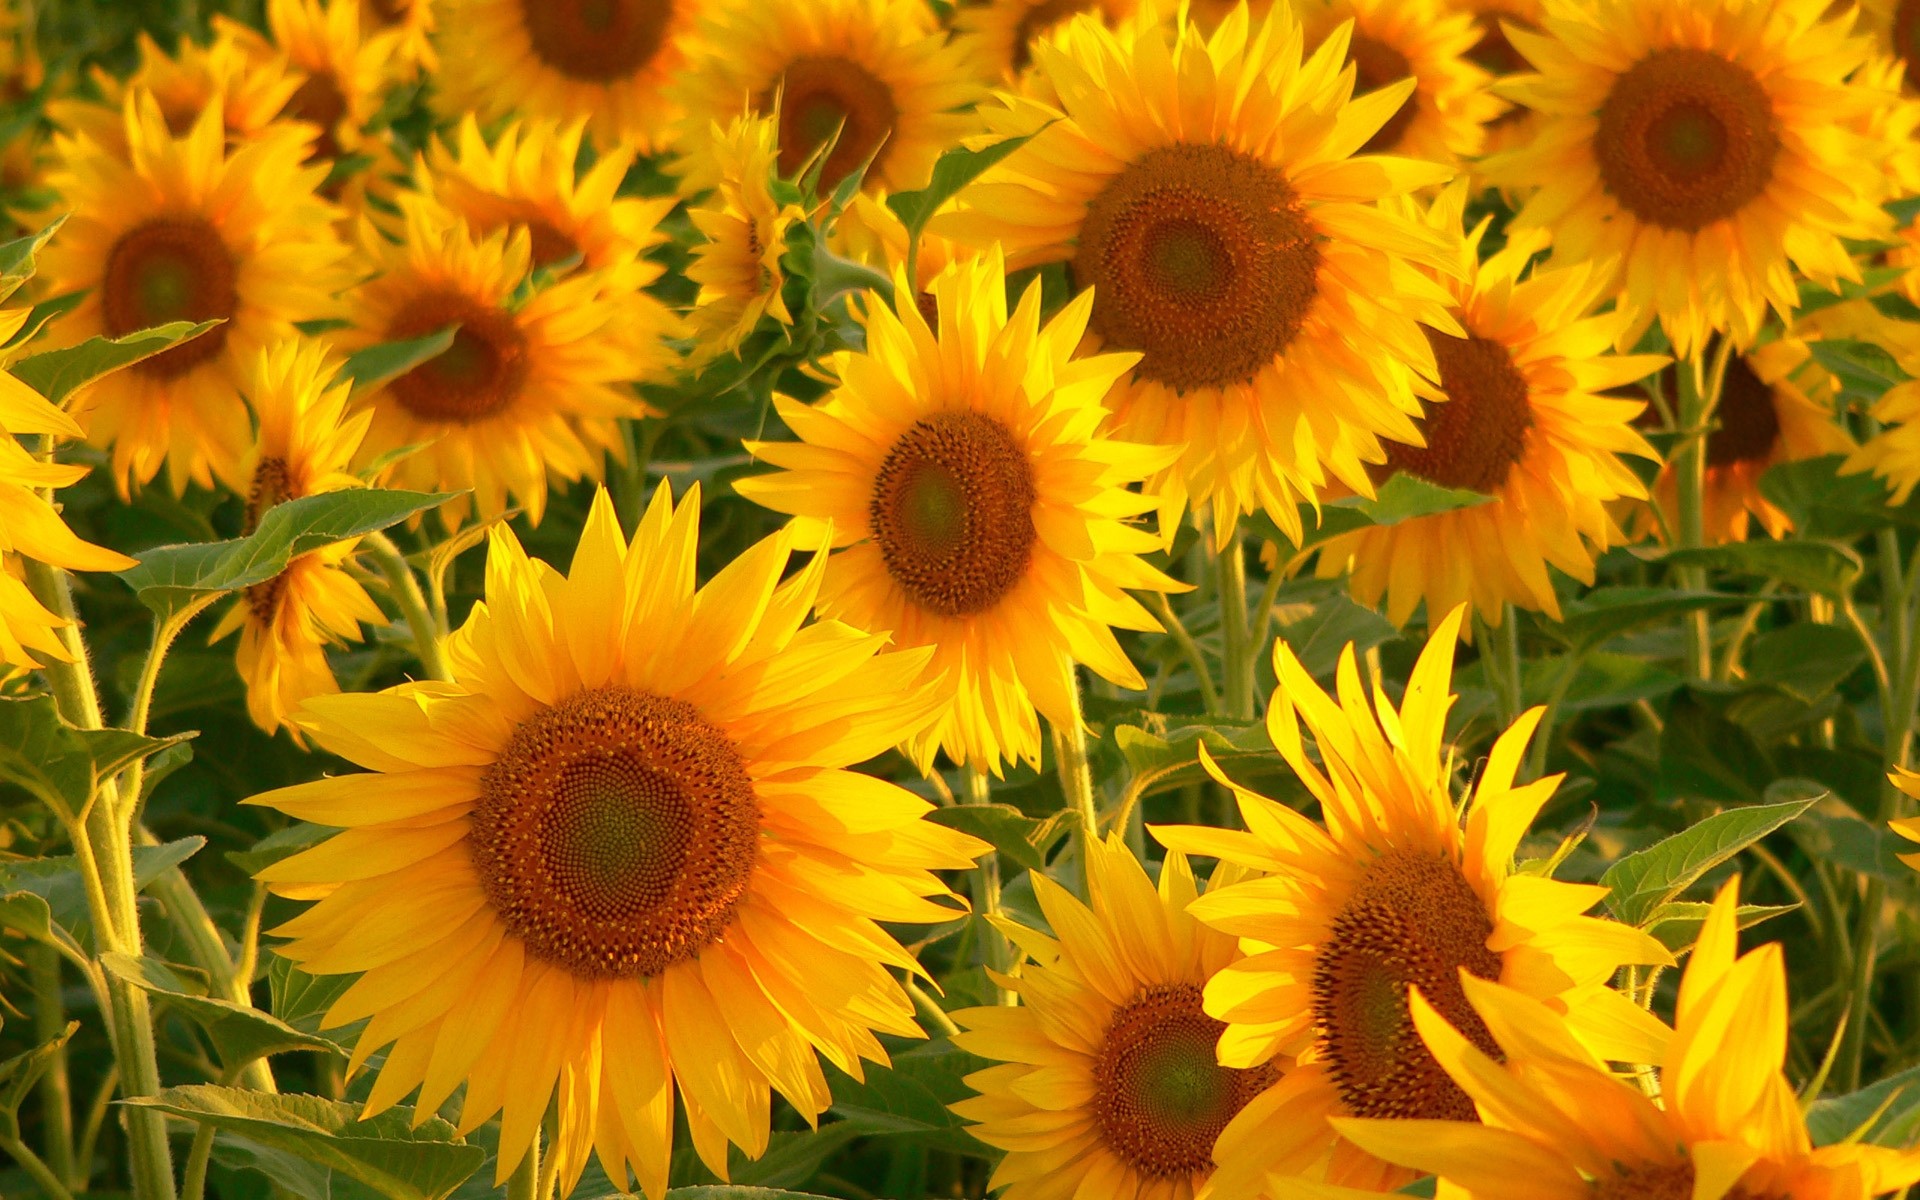 flowers flower nature summer flora leaf sunflower floral garden bright petal beautiful color blooming growth vibrant field season sunny sun yellow background plants